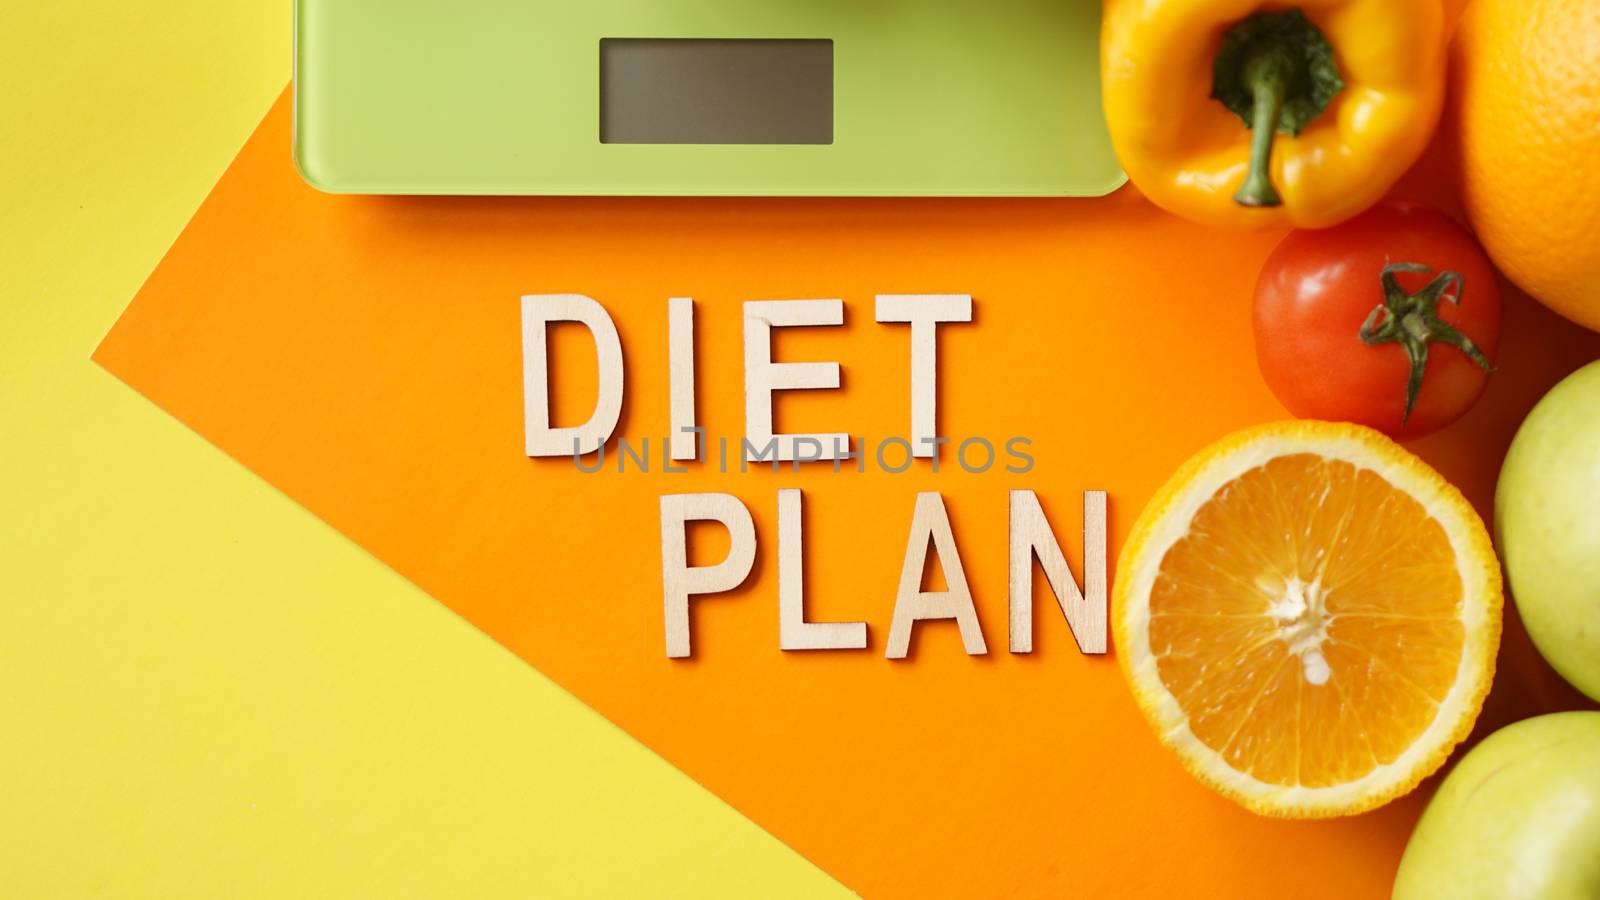 Concept diet. Healthy food, kitchen weight scale. Vegetables and fruits lettering Diet plan on orange background